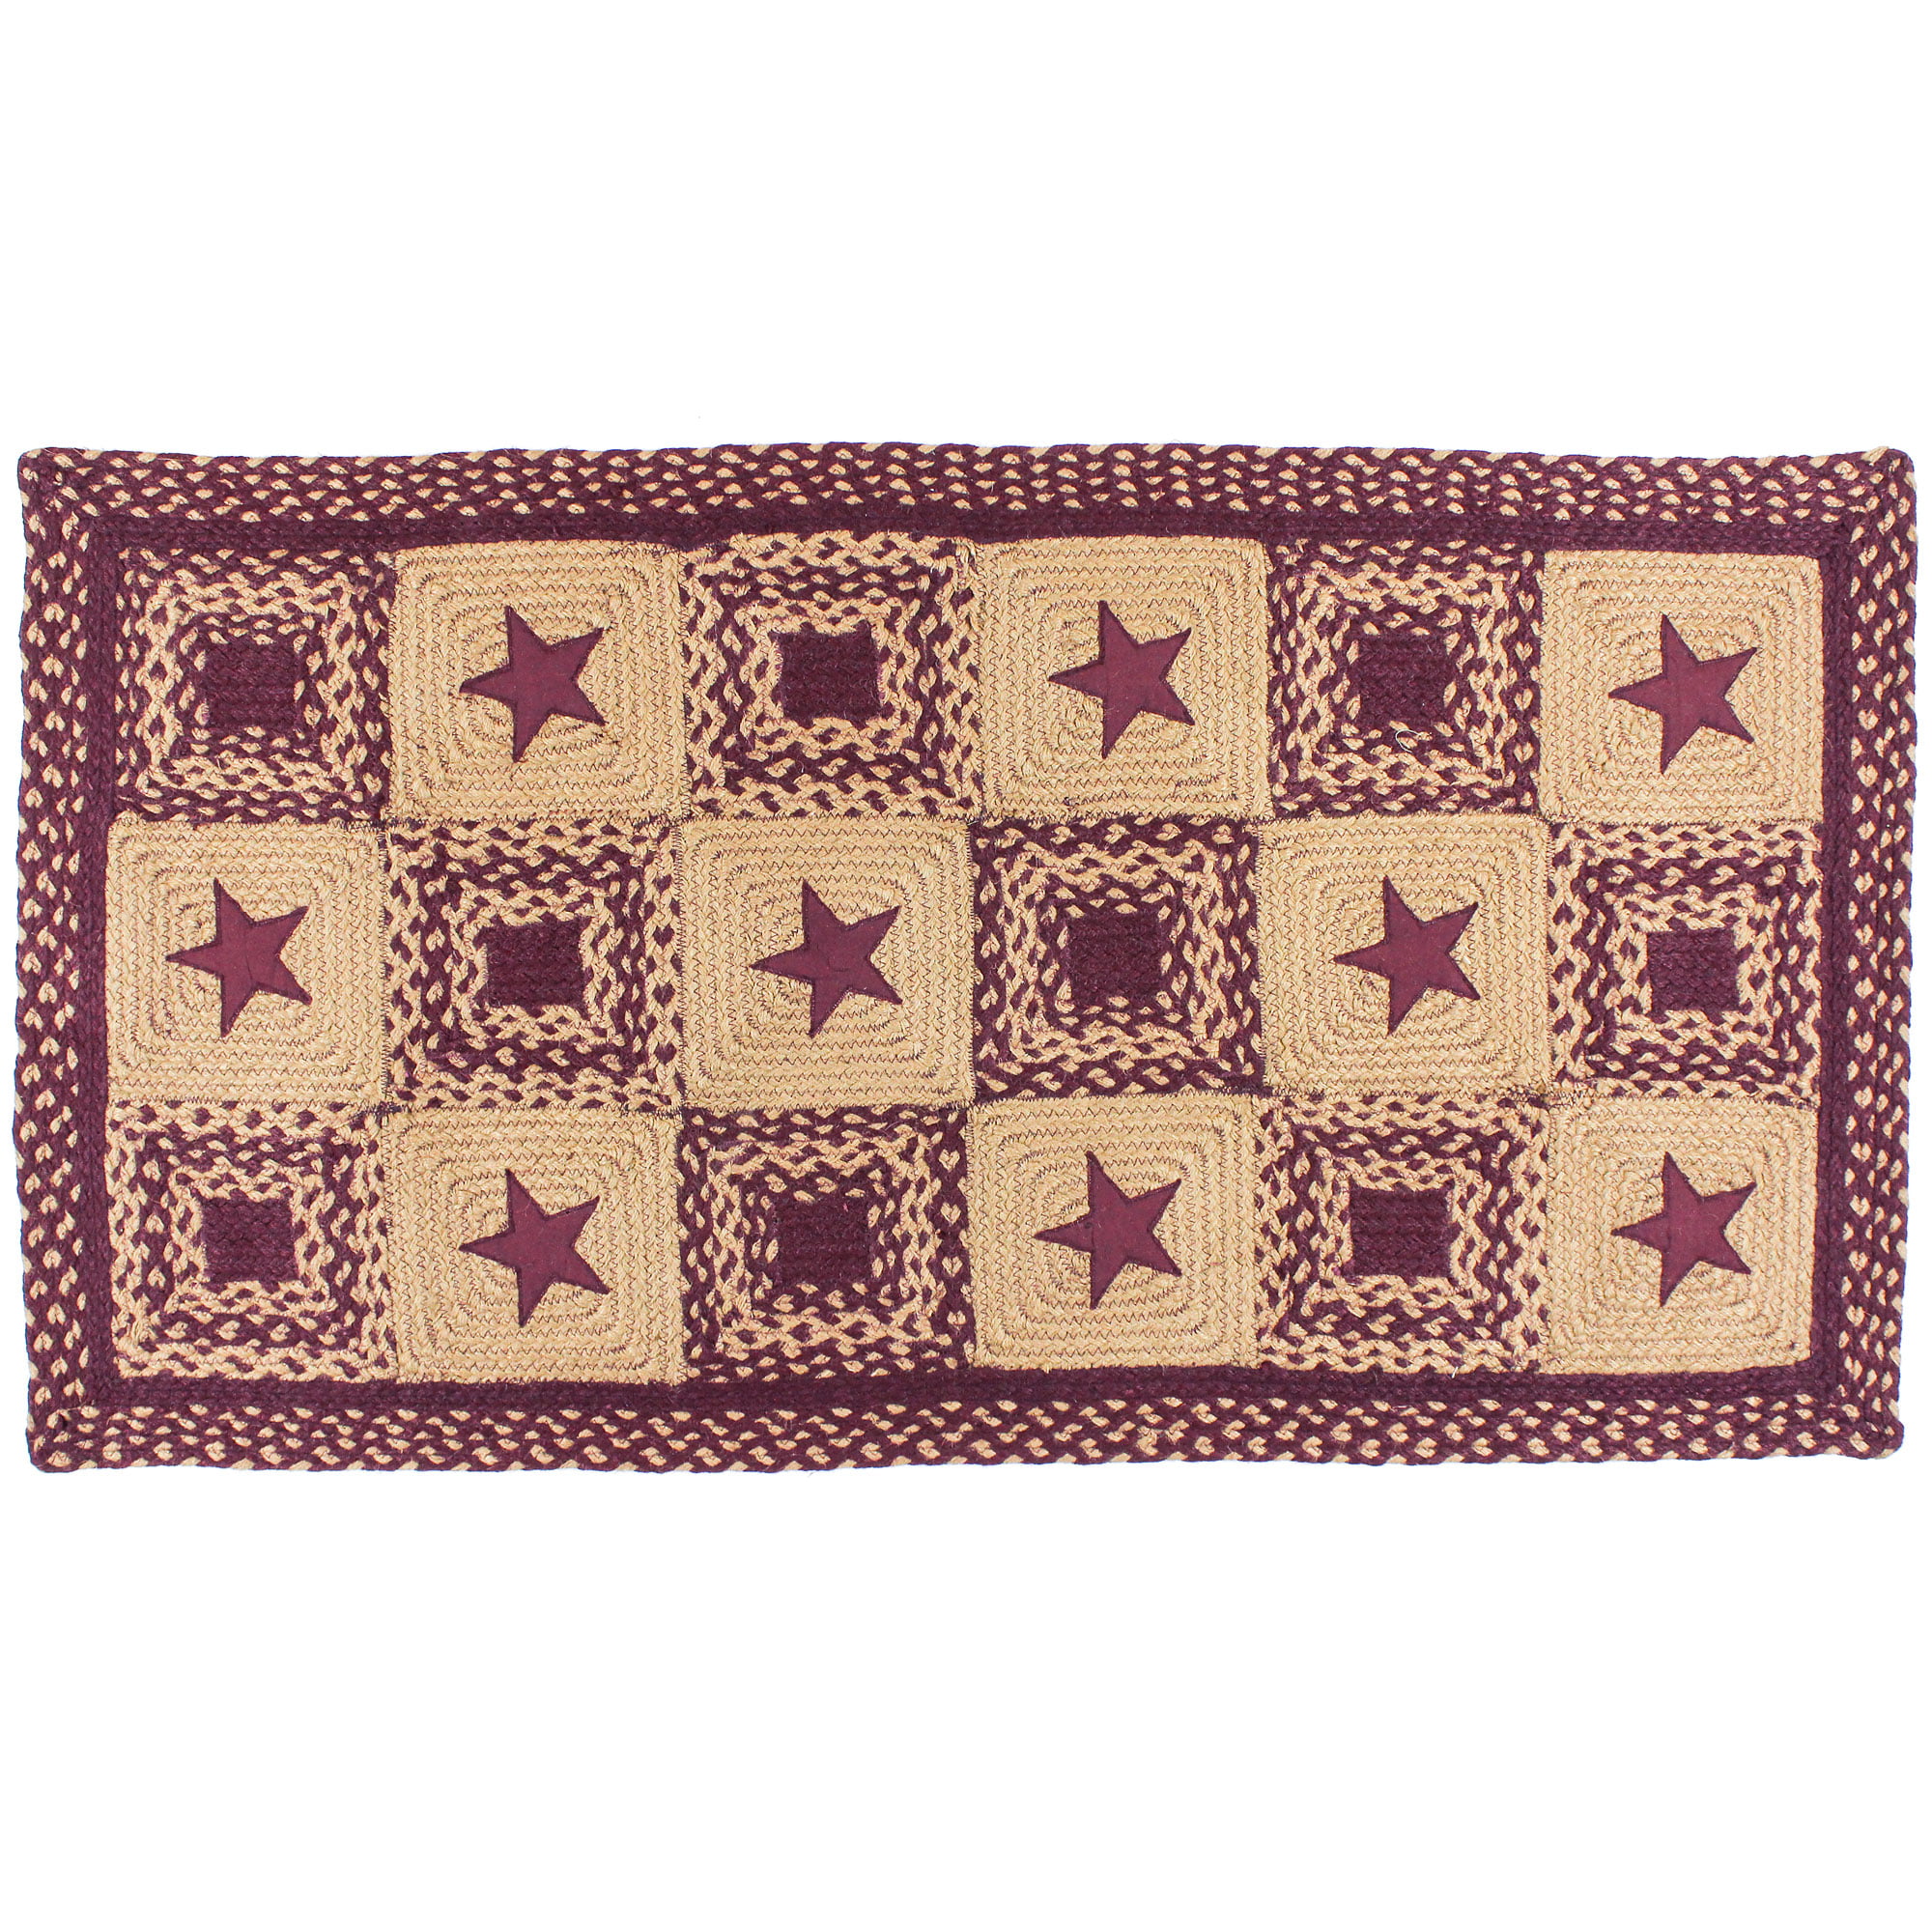 Country Star Jute Braided Rugs By Ihf, Primitive Country Area Rugs